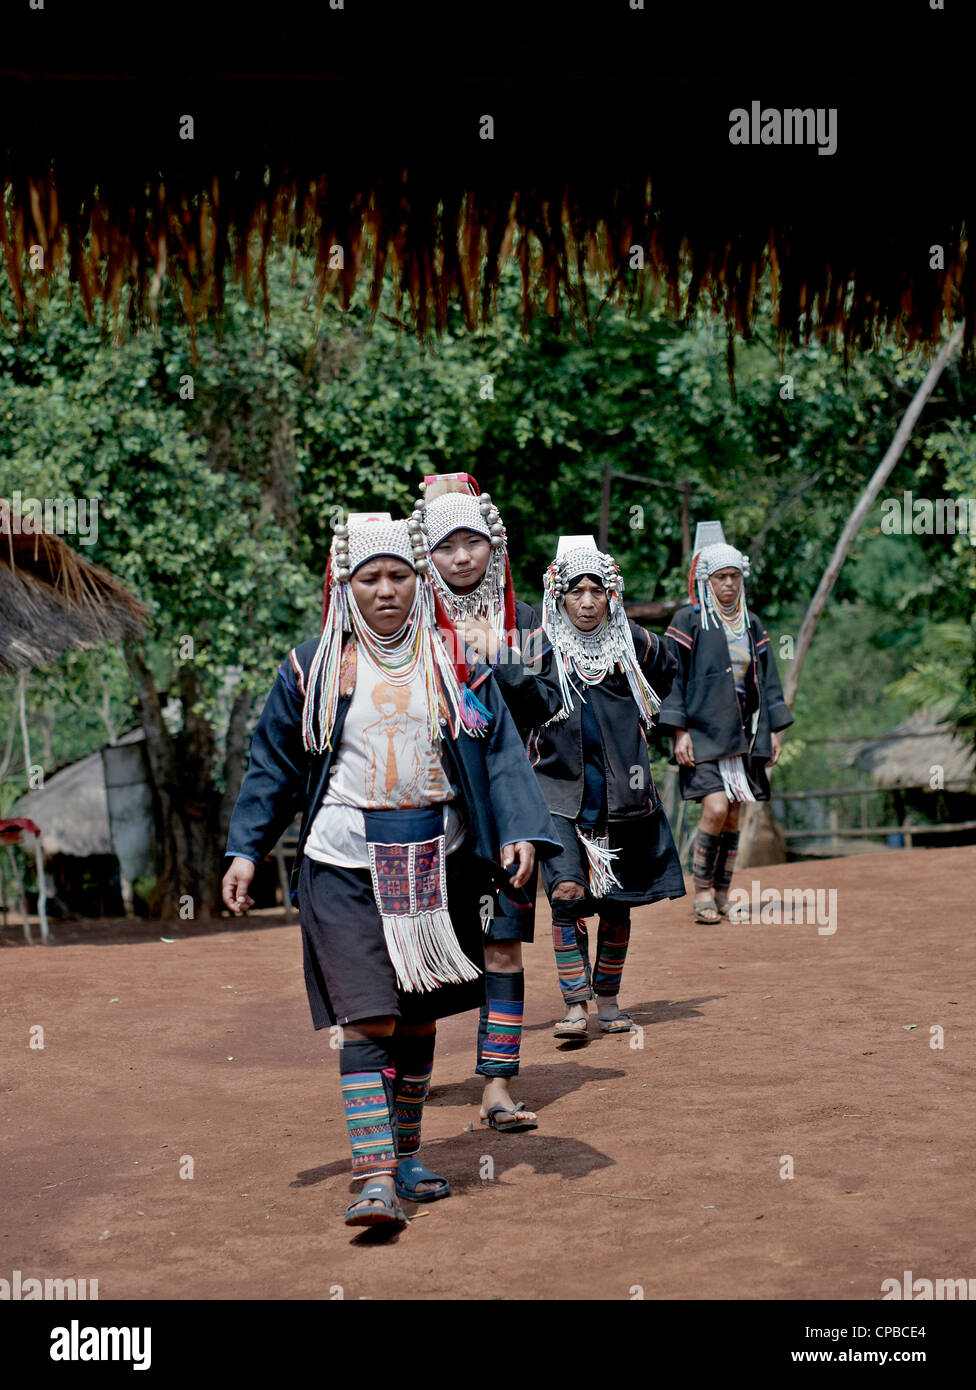 Akha hill tribe villagers of Northern Thailand. Chiang Mai province. Rural Thailand people S.E. Asia. Hill tribes Stock Photo